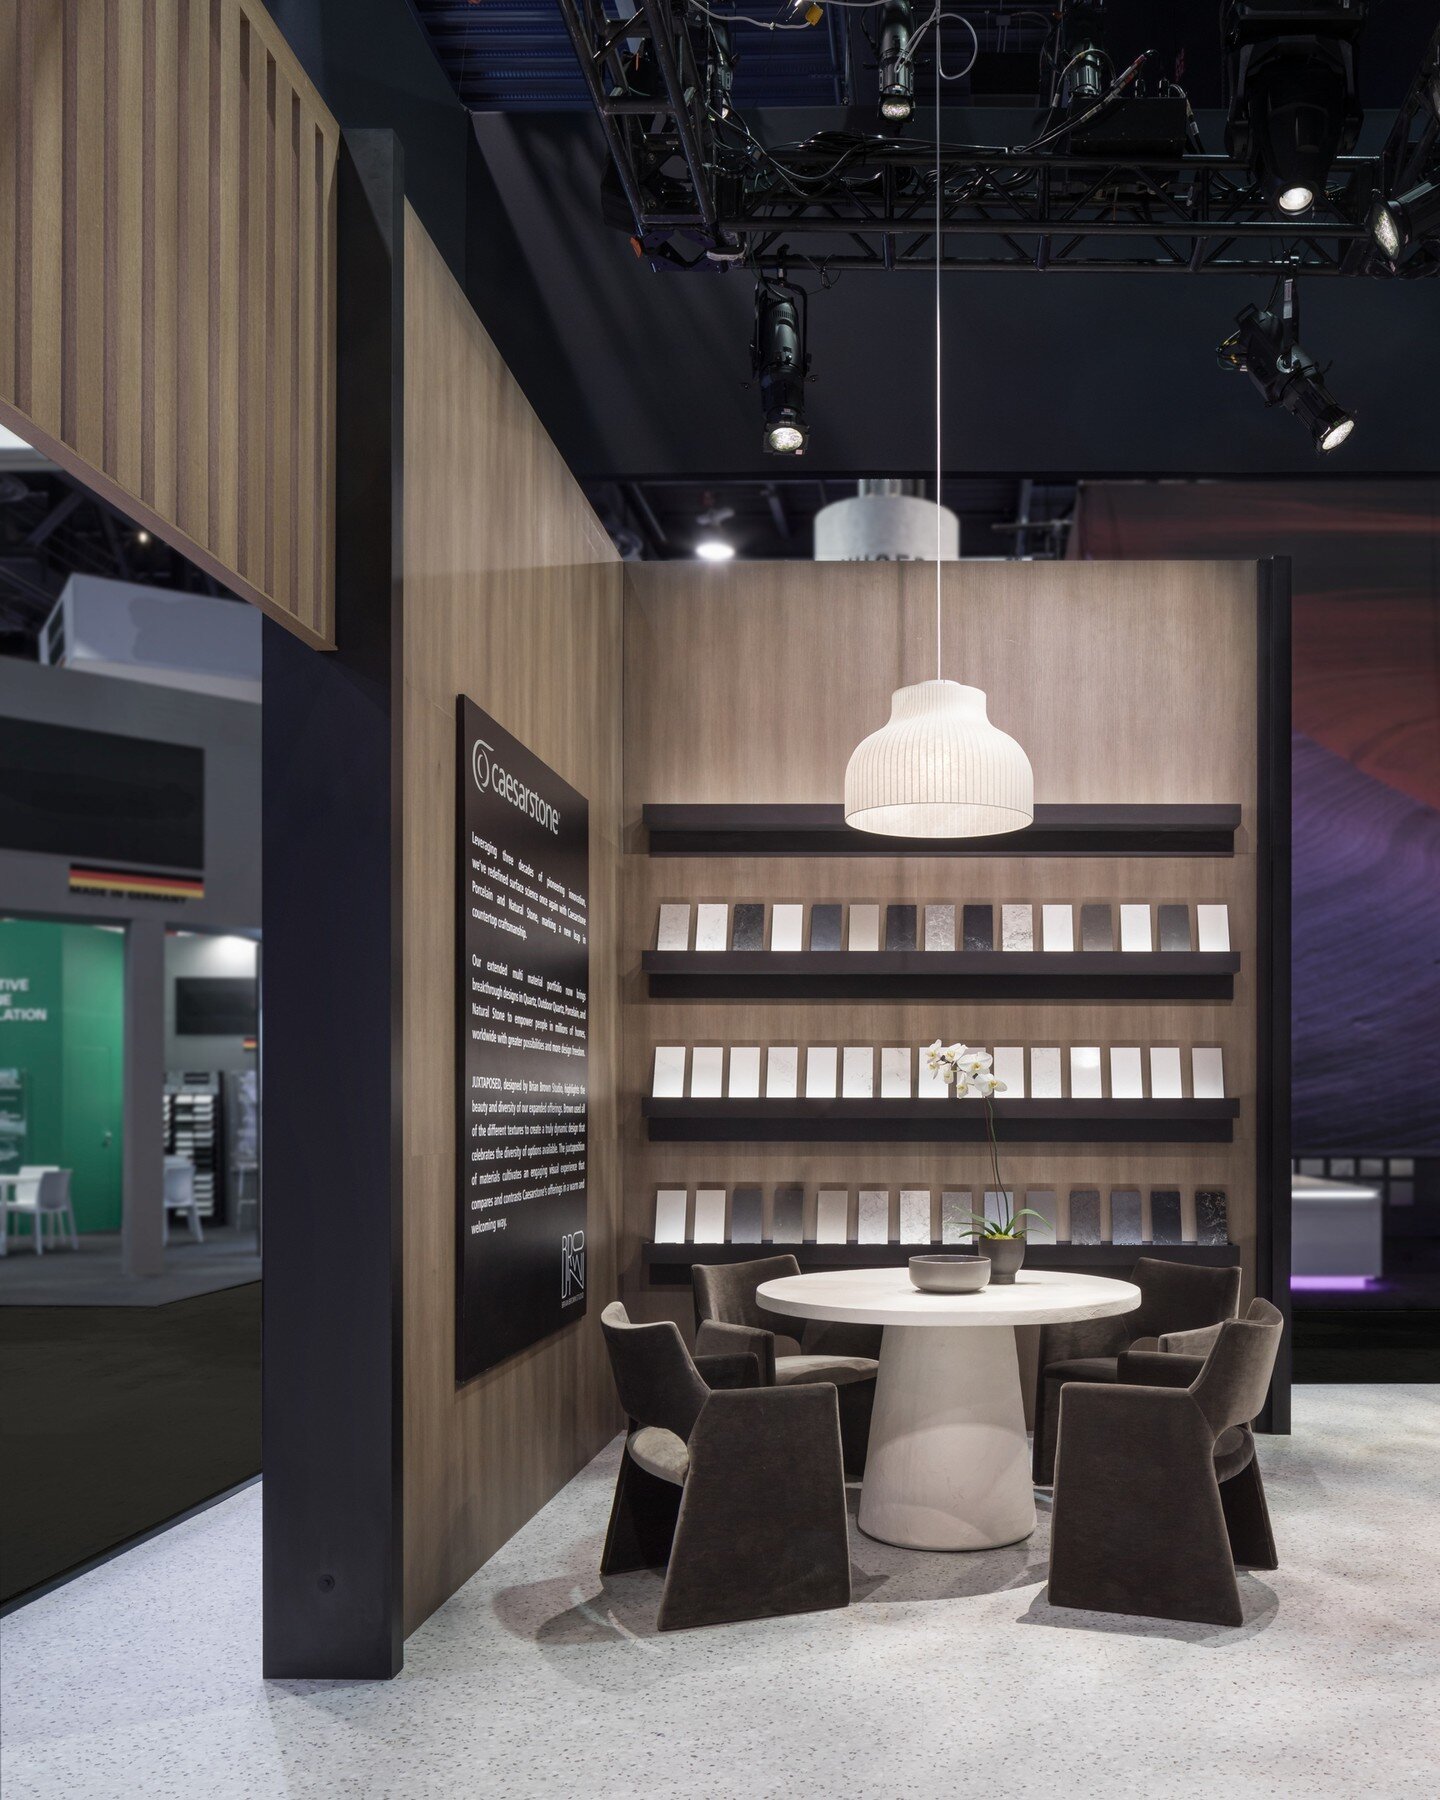 Creating moments of connection. In any design (residential, commercial or temporary spaces) human connection needs to be supported. Here we created space for Caesarstone's clients to connect with them. Supporting the launch of their new collection wa